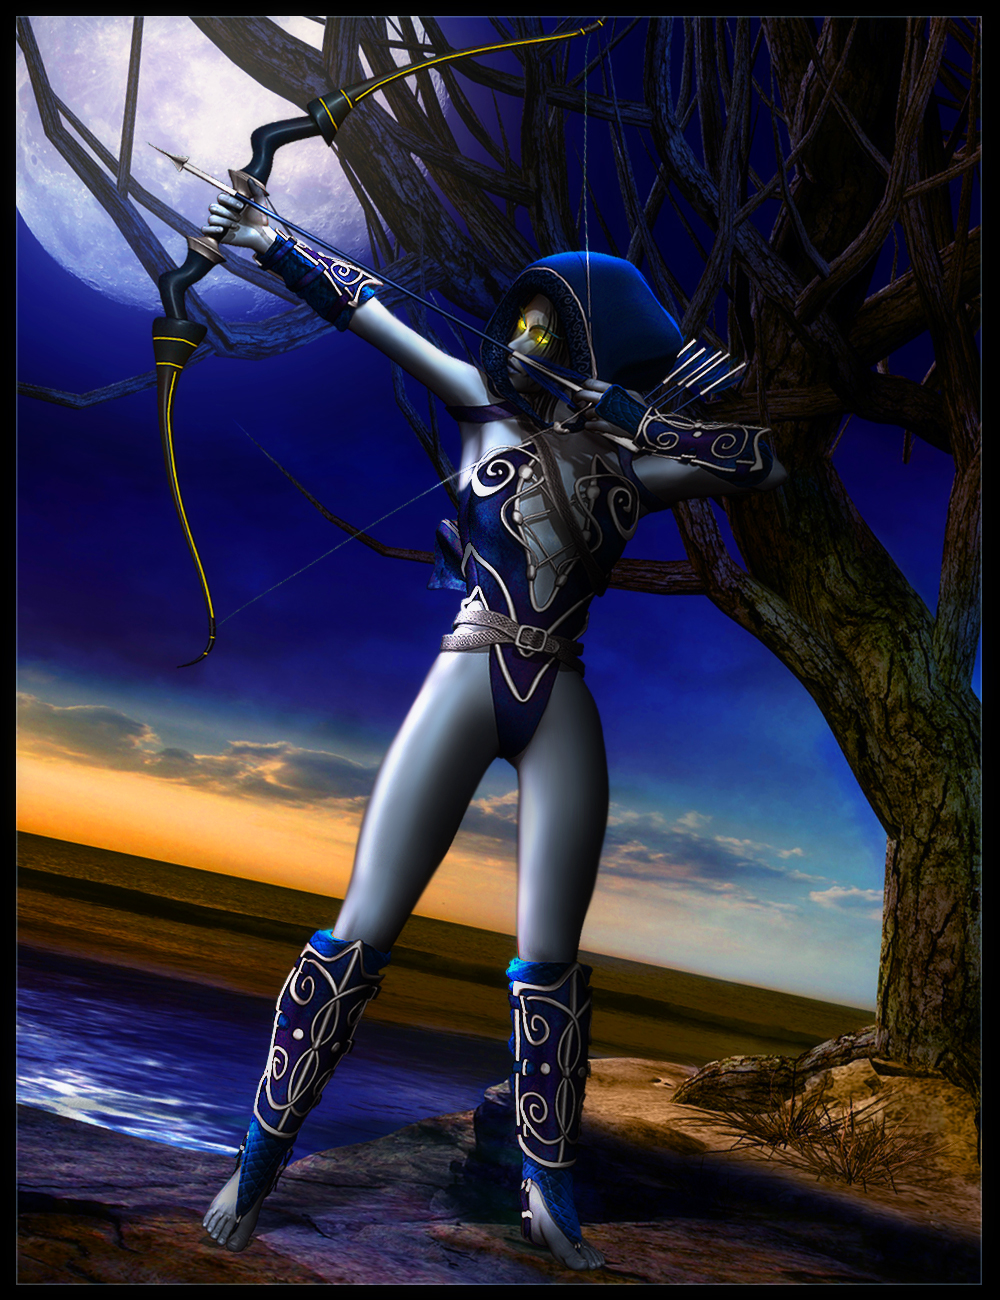 Midnight Huntress for Genesis by: IgnisSerpentus, 3D Models by Daz 3D